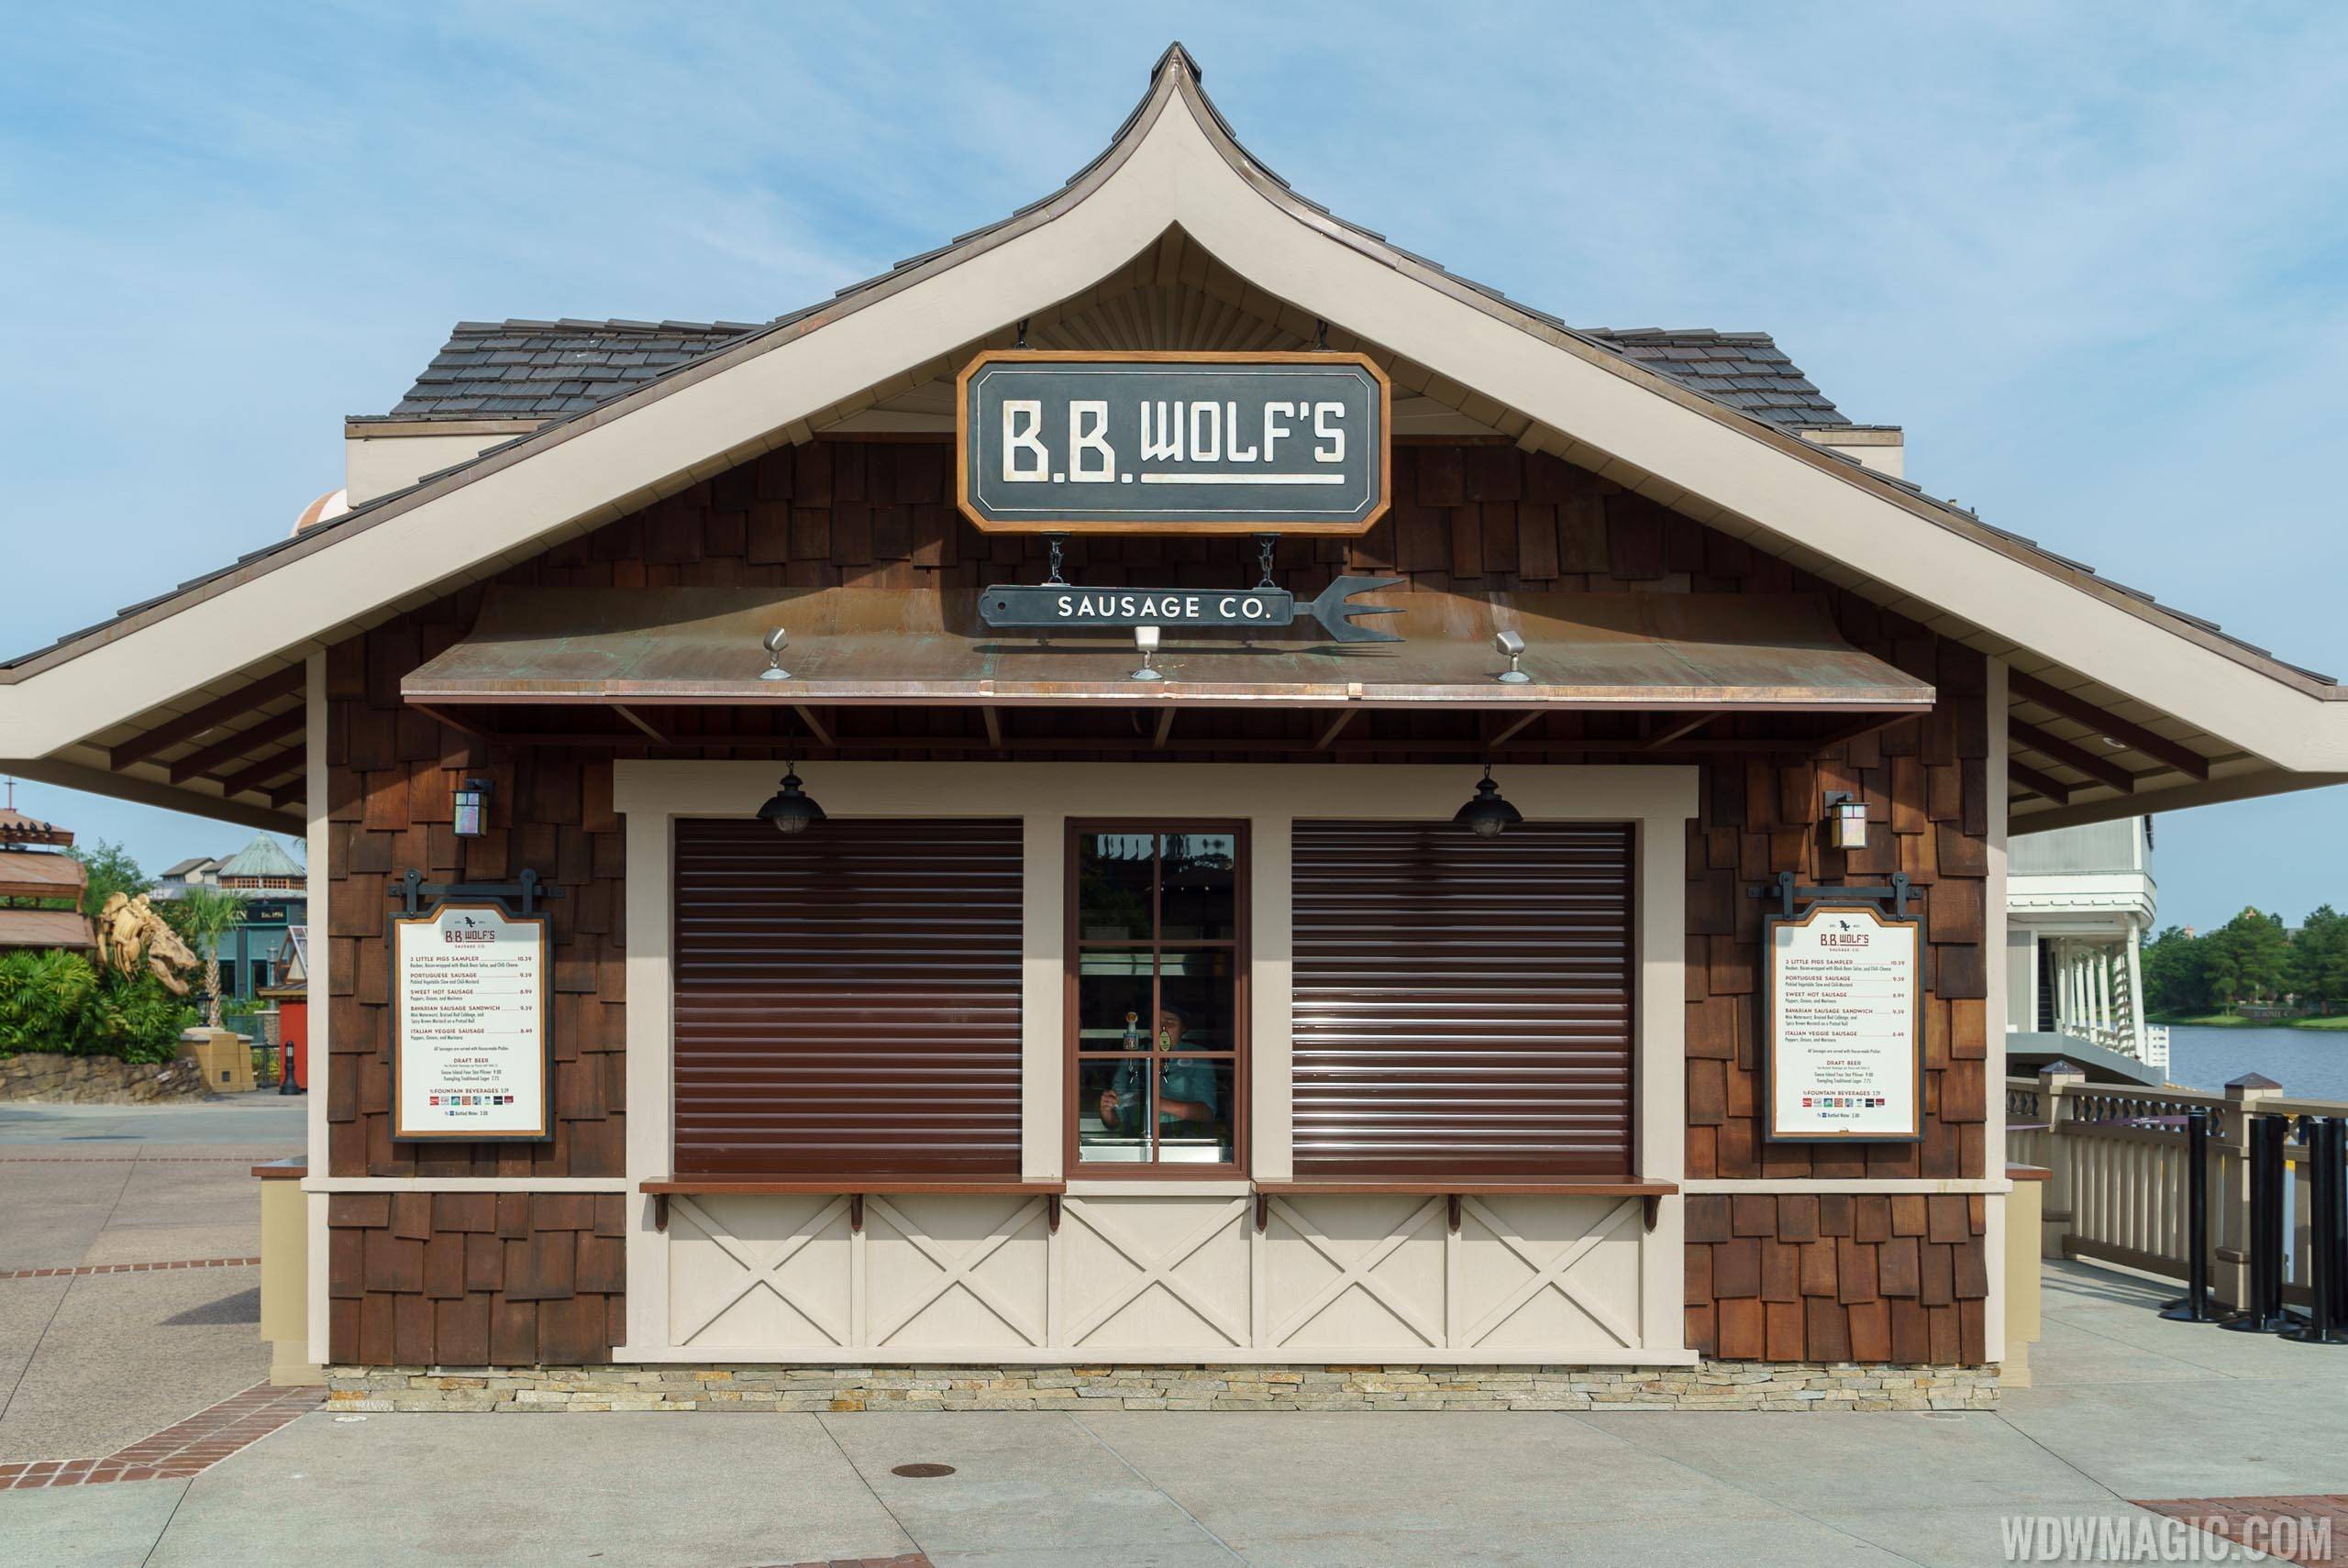 Skip the lines at B.B. Wold's with Mobile Order